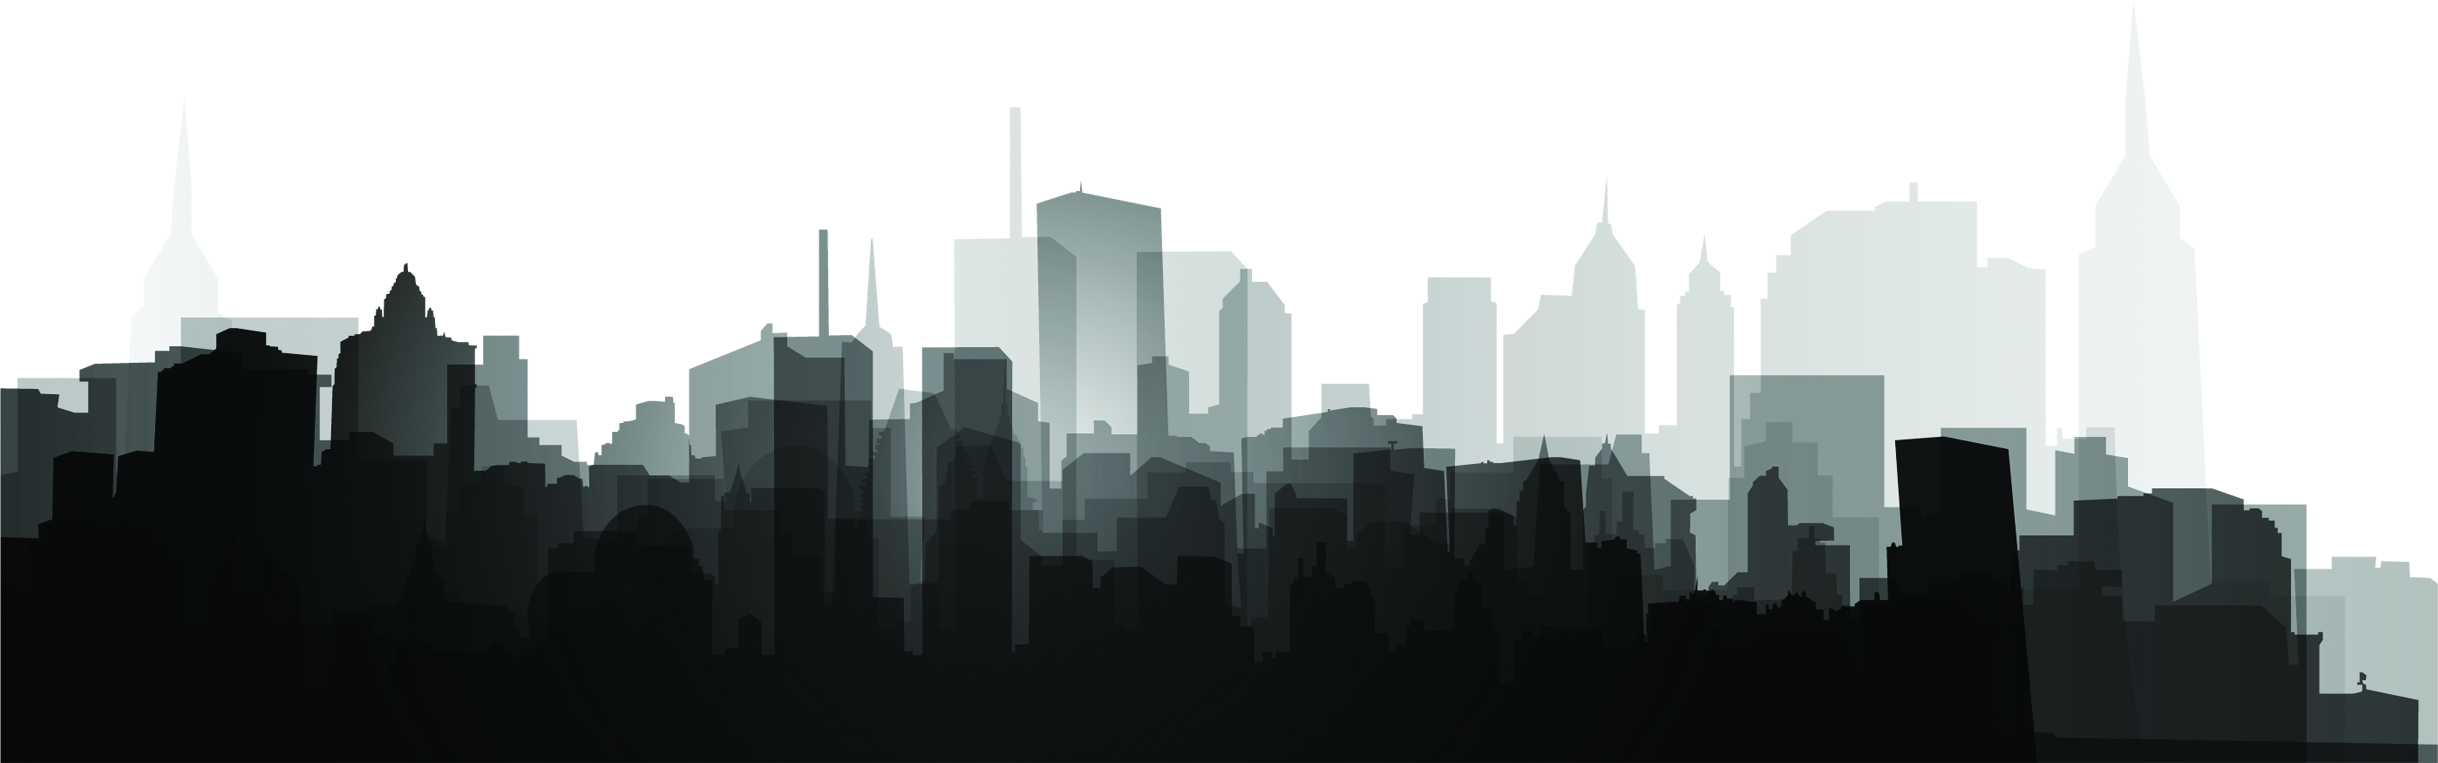 Skyscraper Silhouette Png City Silhouette Png